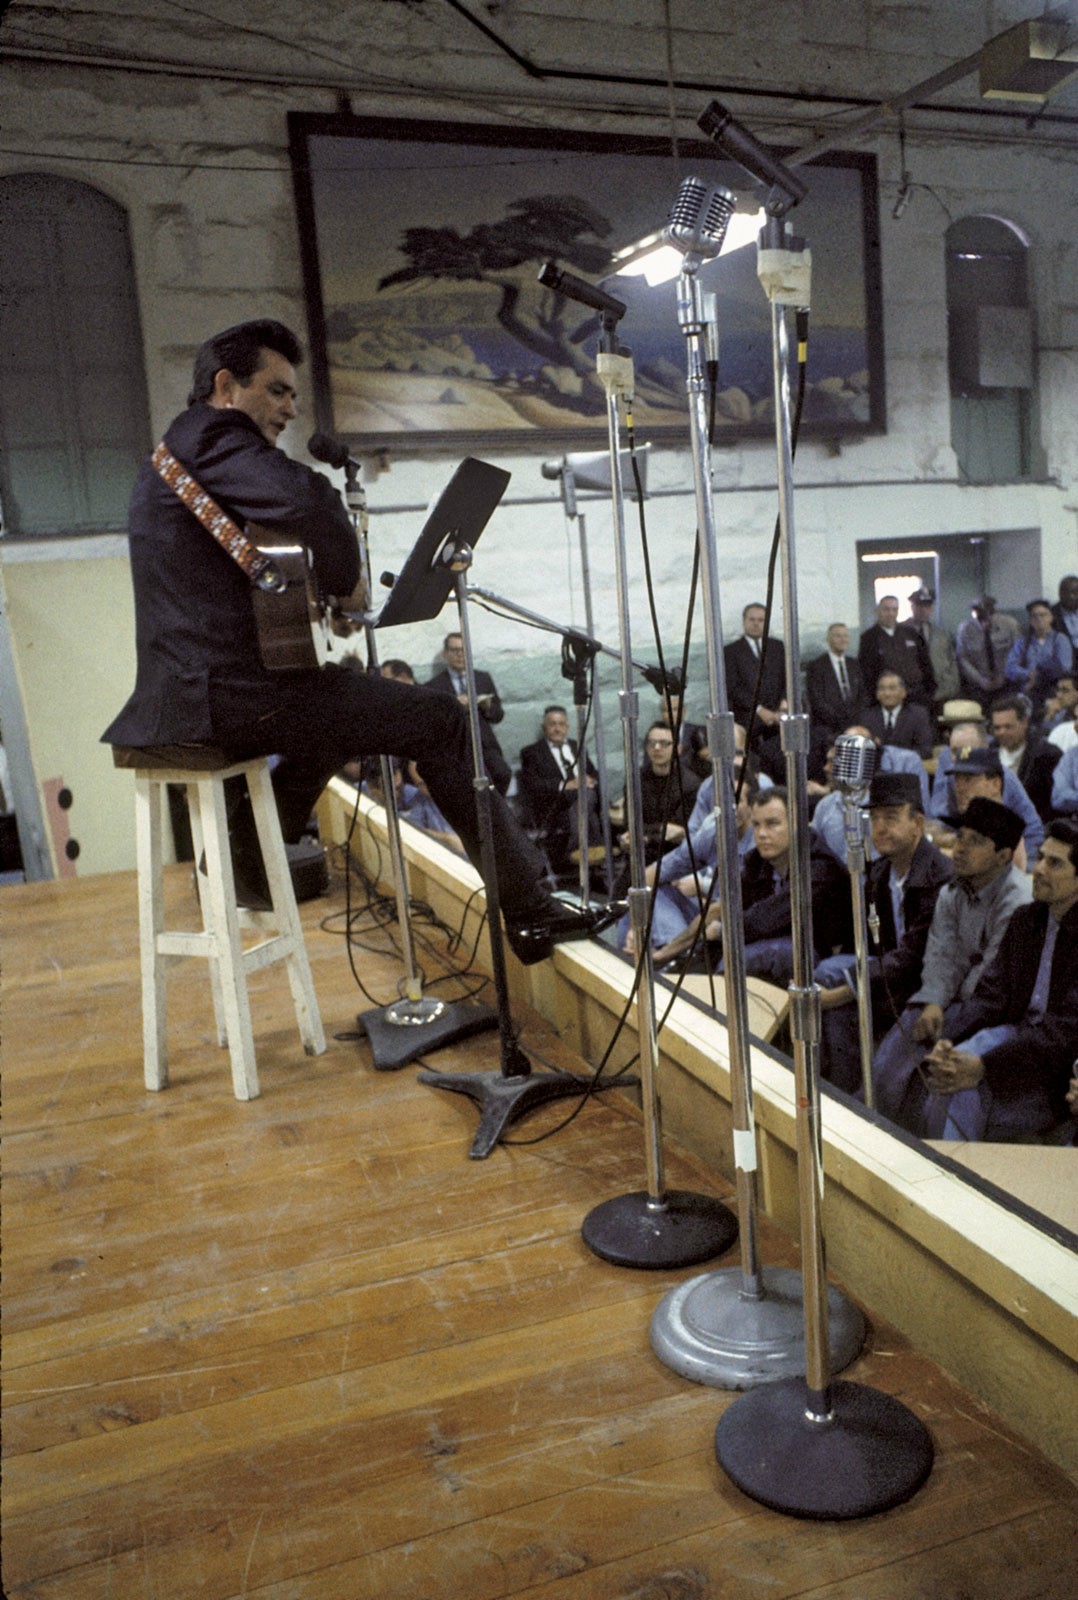 Fascinating Historical Picture of Johnny Cash on 1/13/1968 